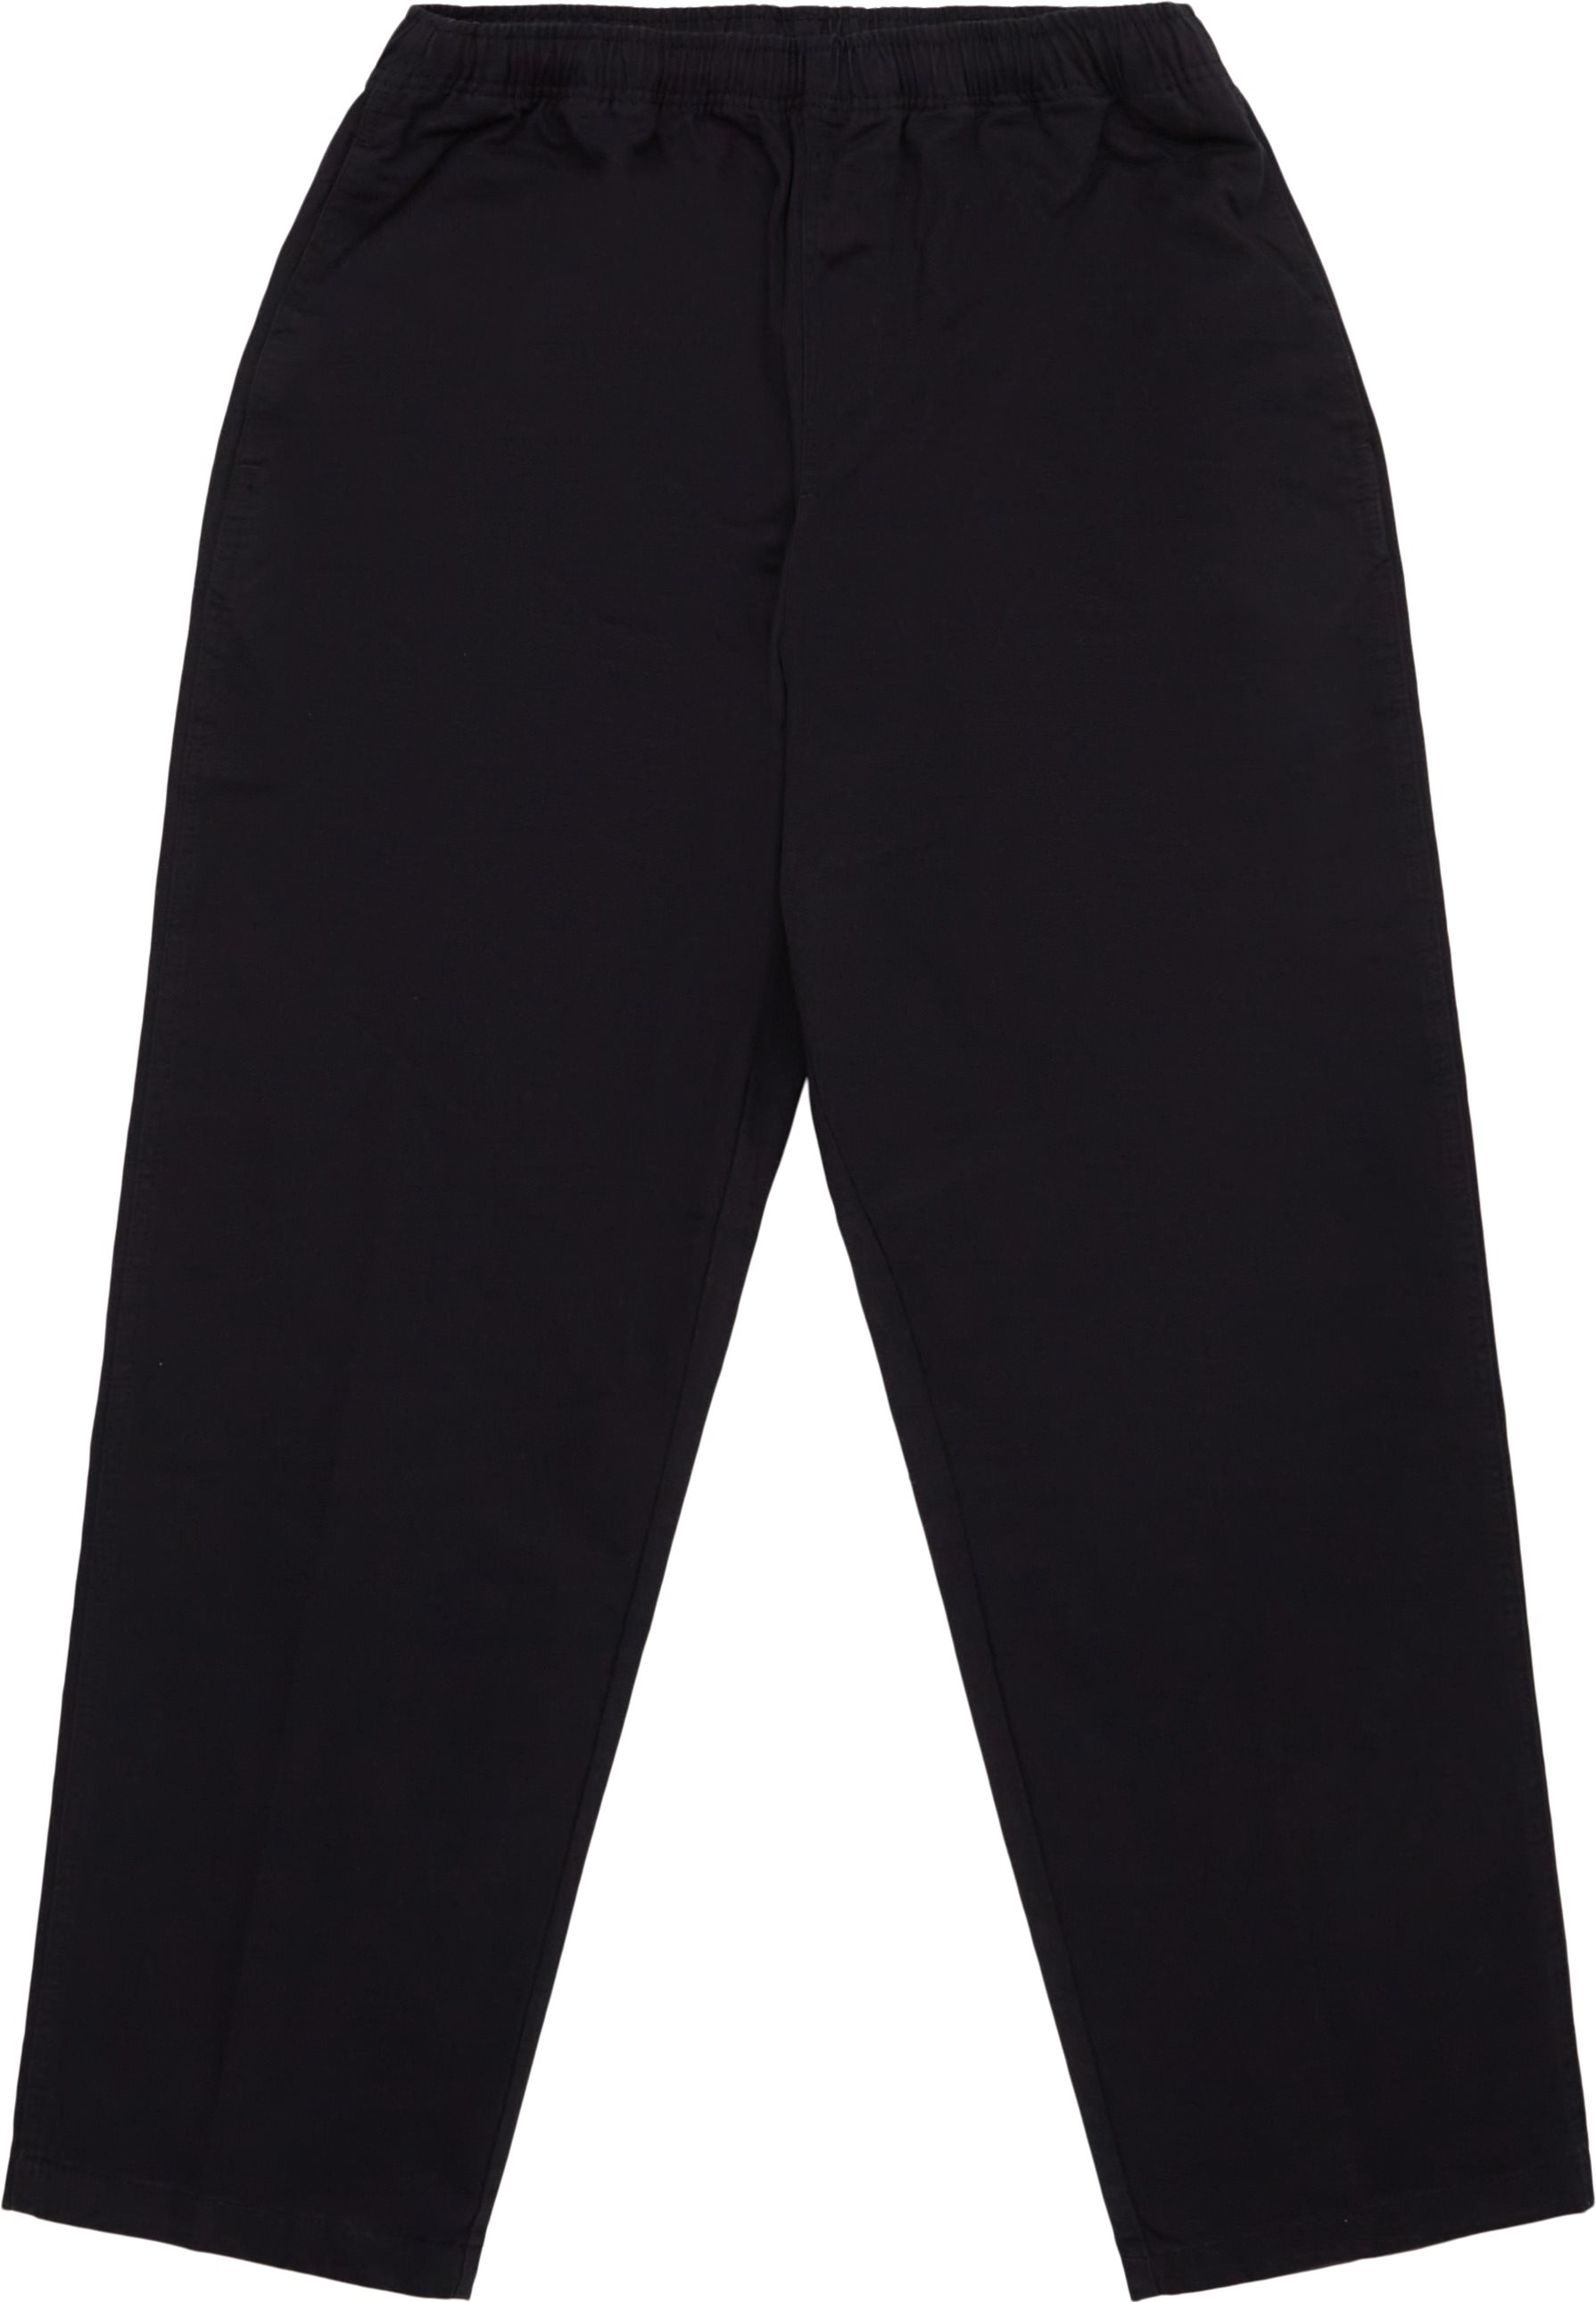 Obey Bukser EASY TWILL PANT SS23 142020142 Sort